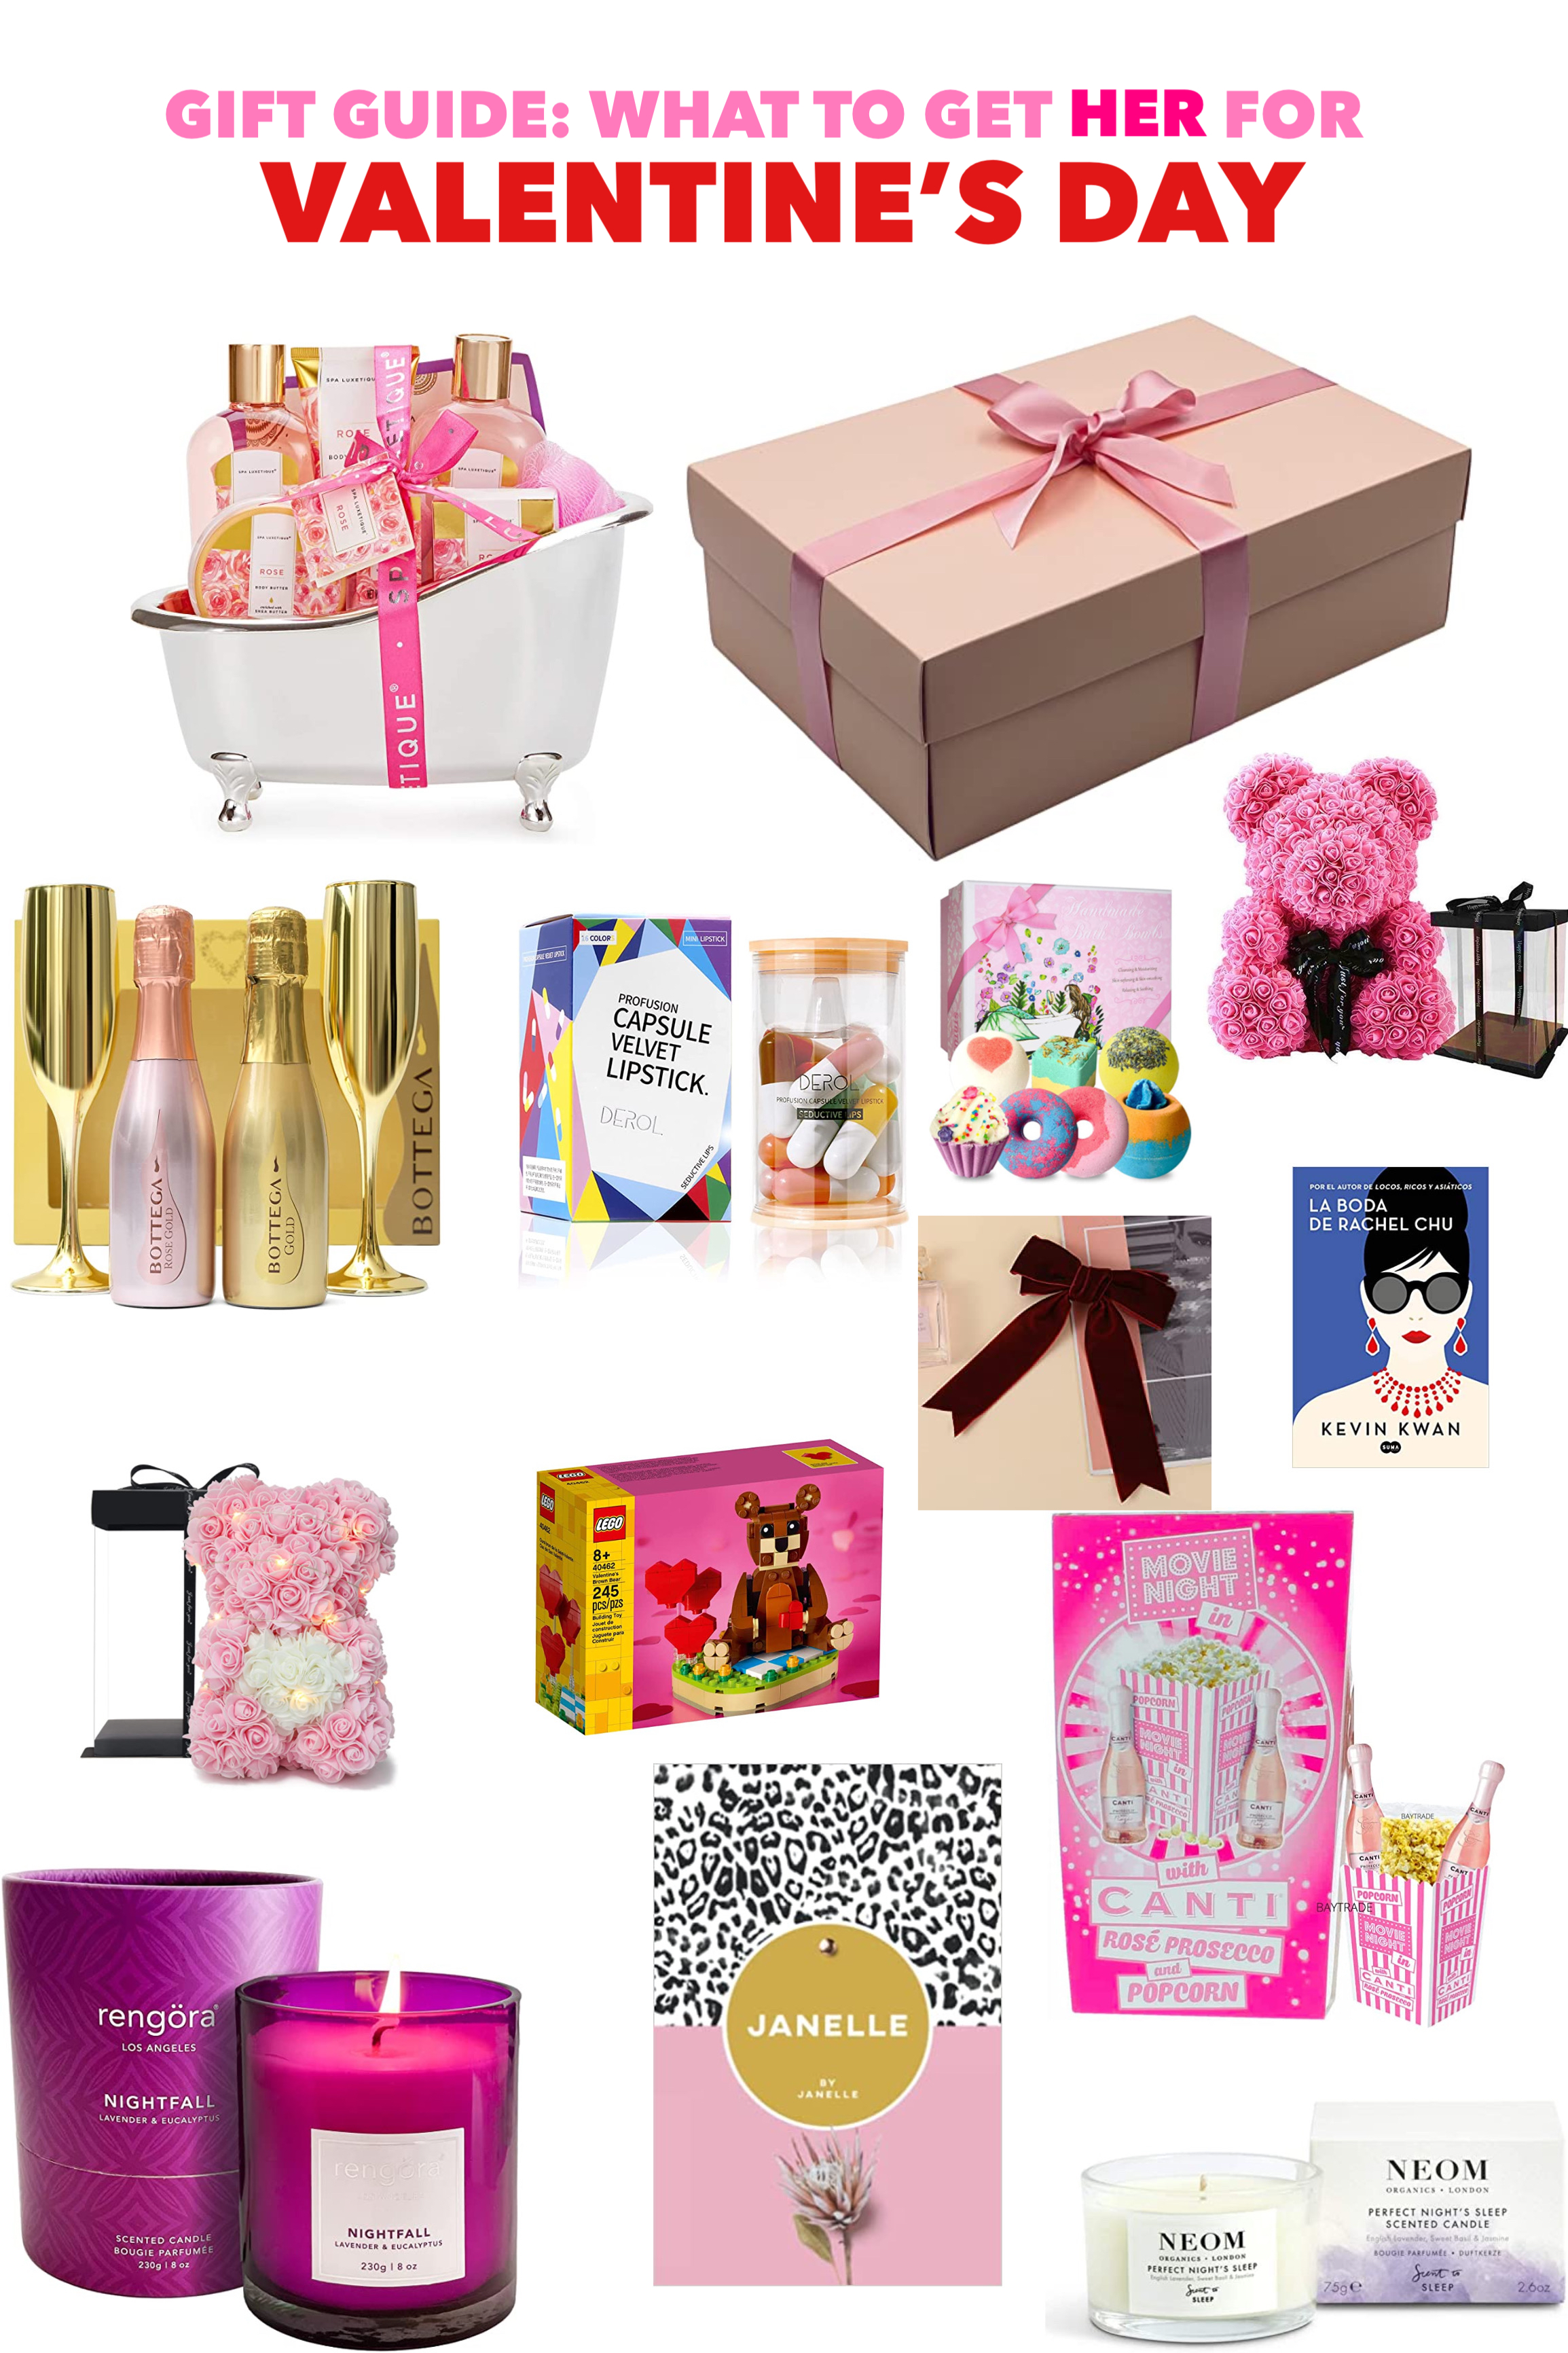 Gifts She’ll Love This Valentine’s Day – What To Get Her